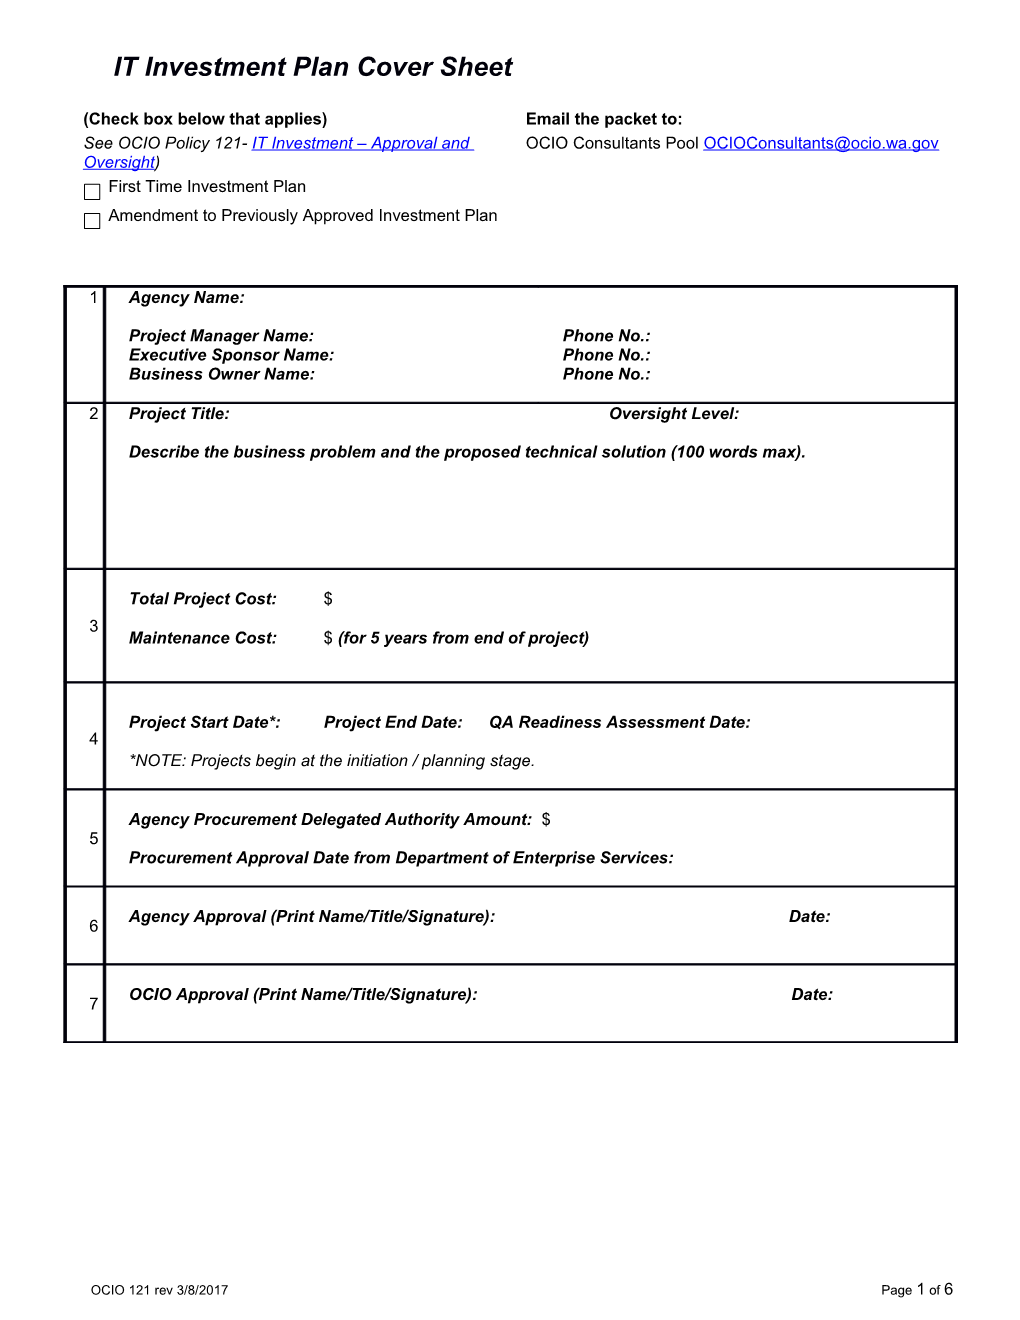 IT Investment Submission Form - Short & Long Budget